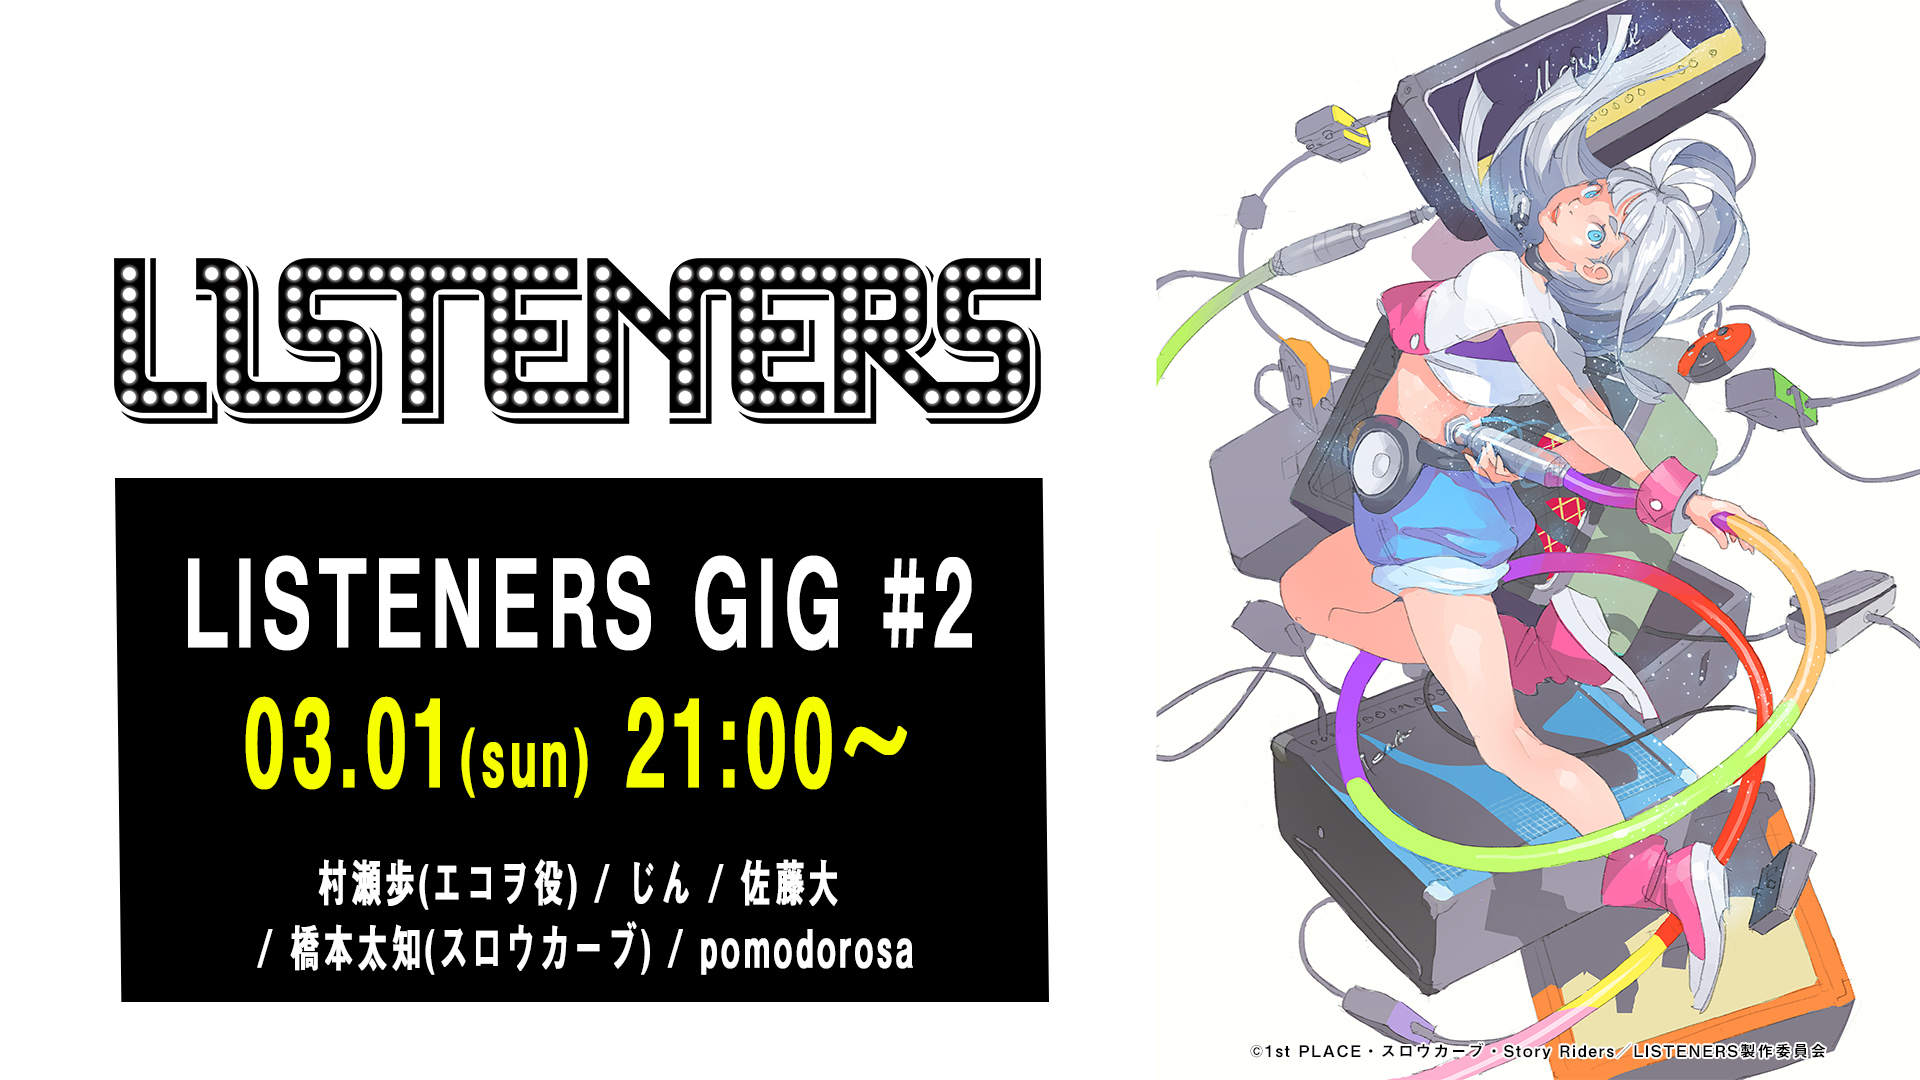 「LISTENERS GIG #2」 (C)1st PLACE・スロウカーブ・Story Riders／LISTENERS製作委員会